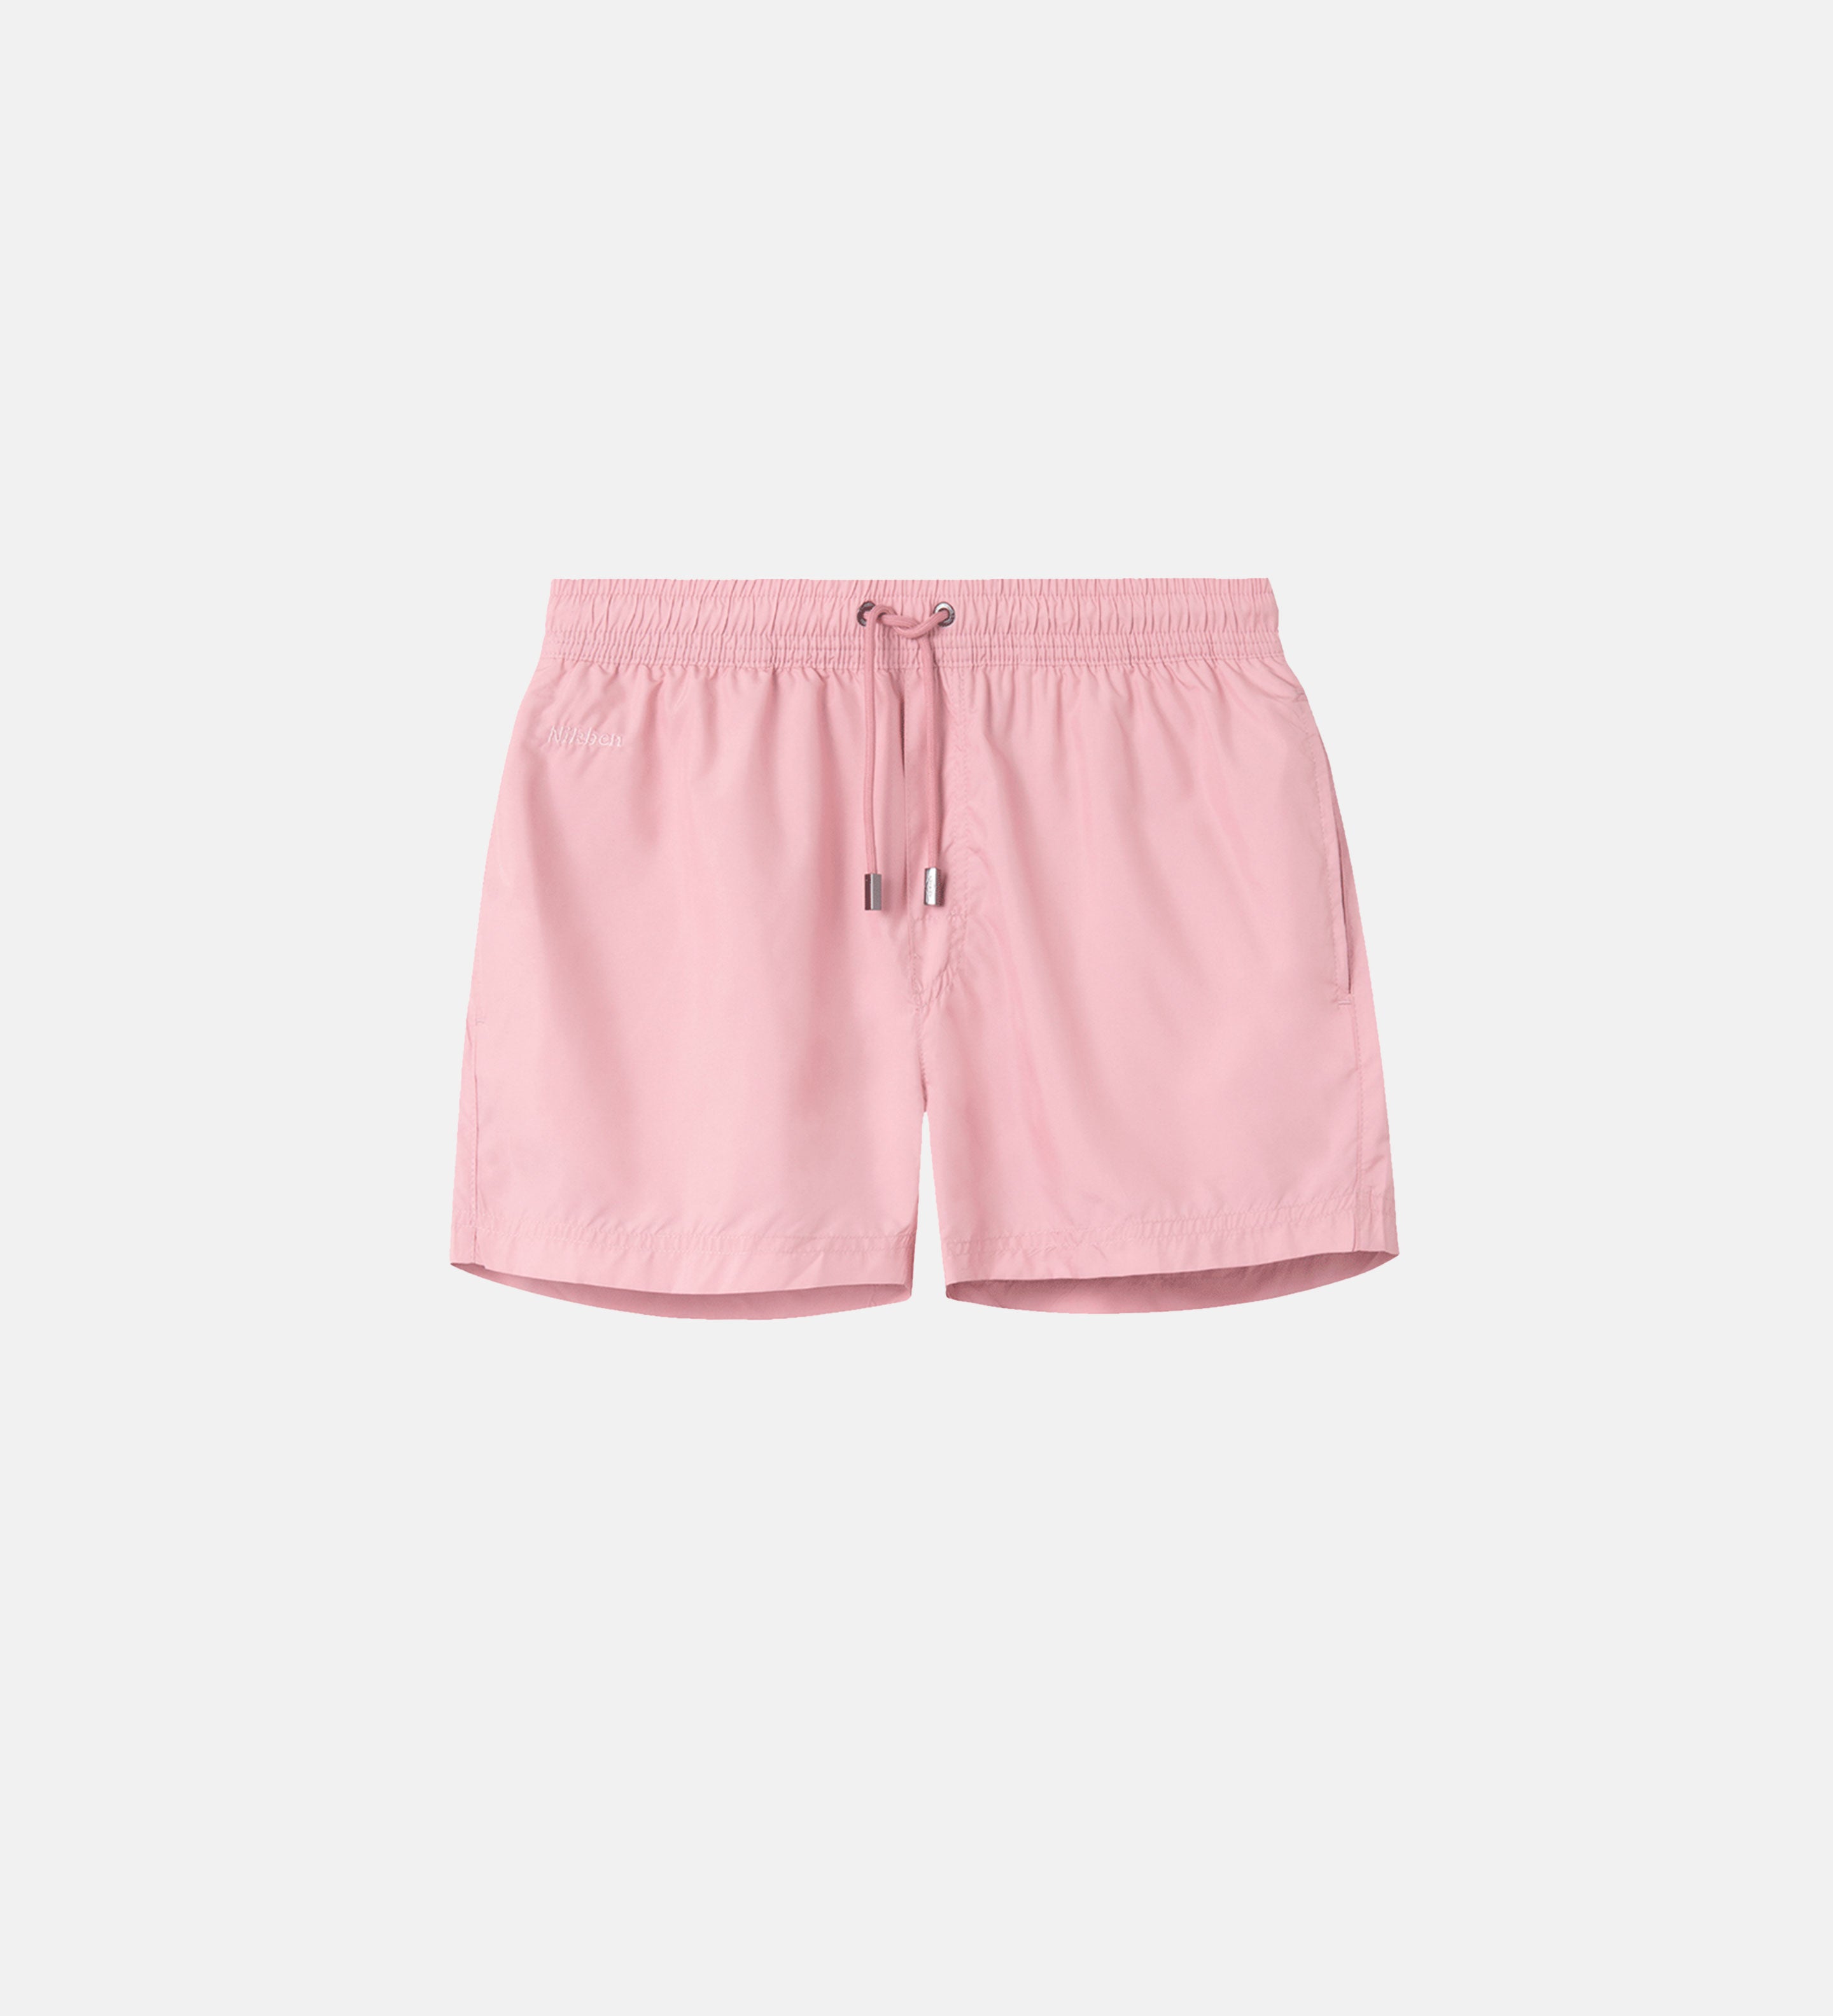 Pink swim trunks. Mid length with drawstring and two side pockets.